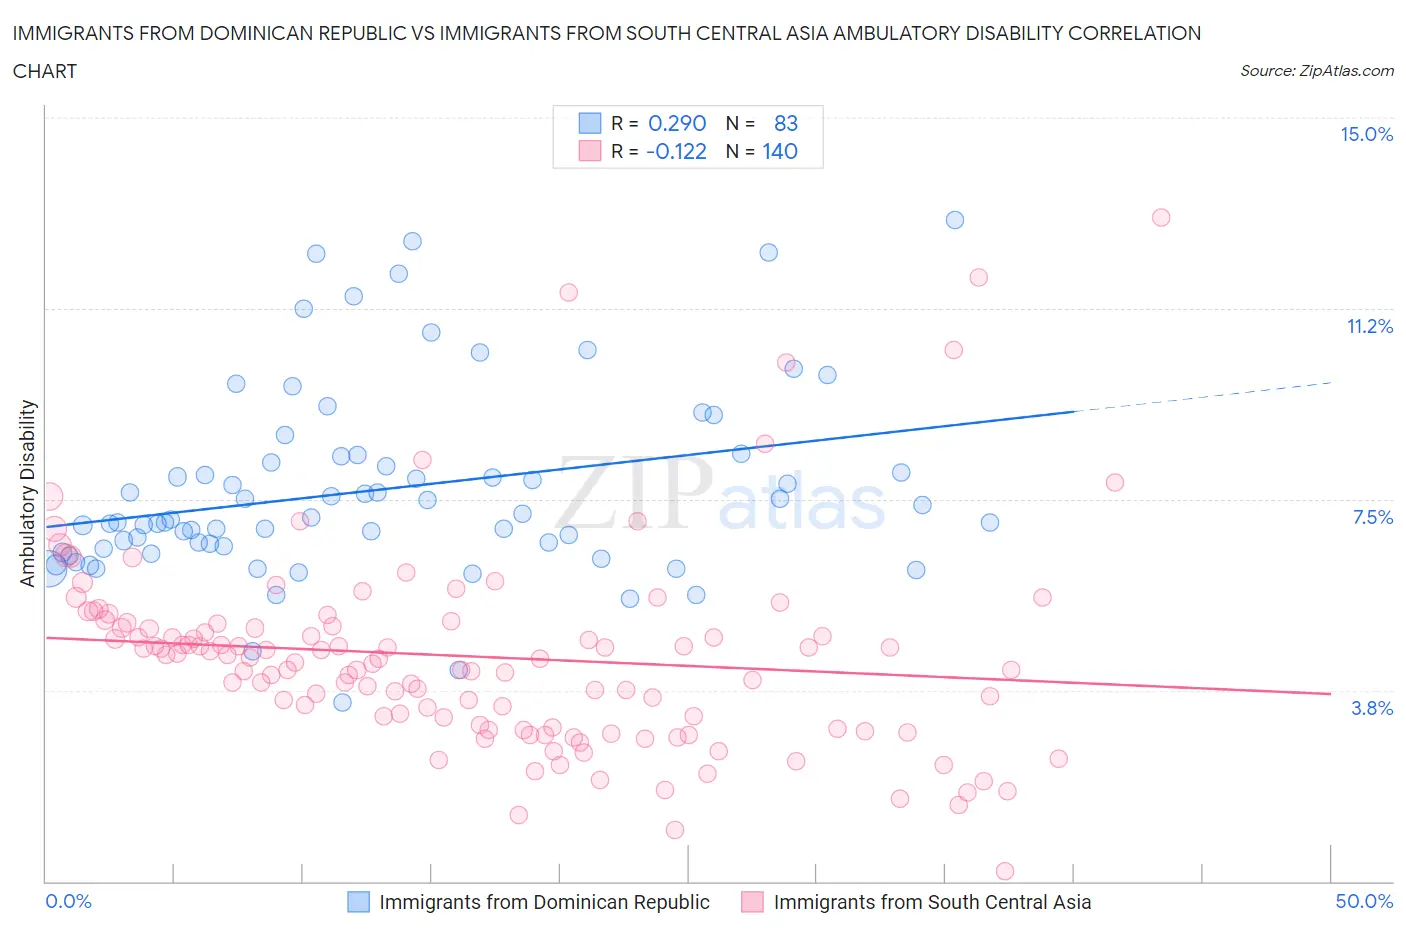 Immigrants from Dominican Republic vs Immigrants from South Central Asia Ambulatory Disability